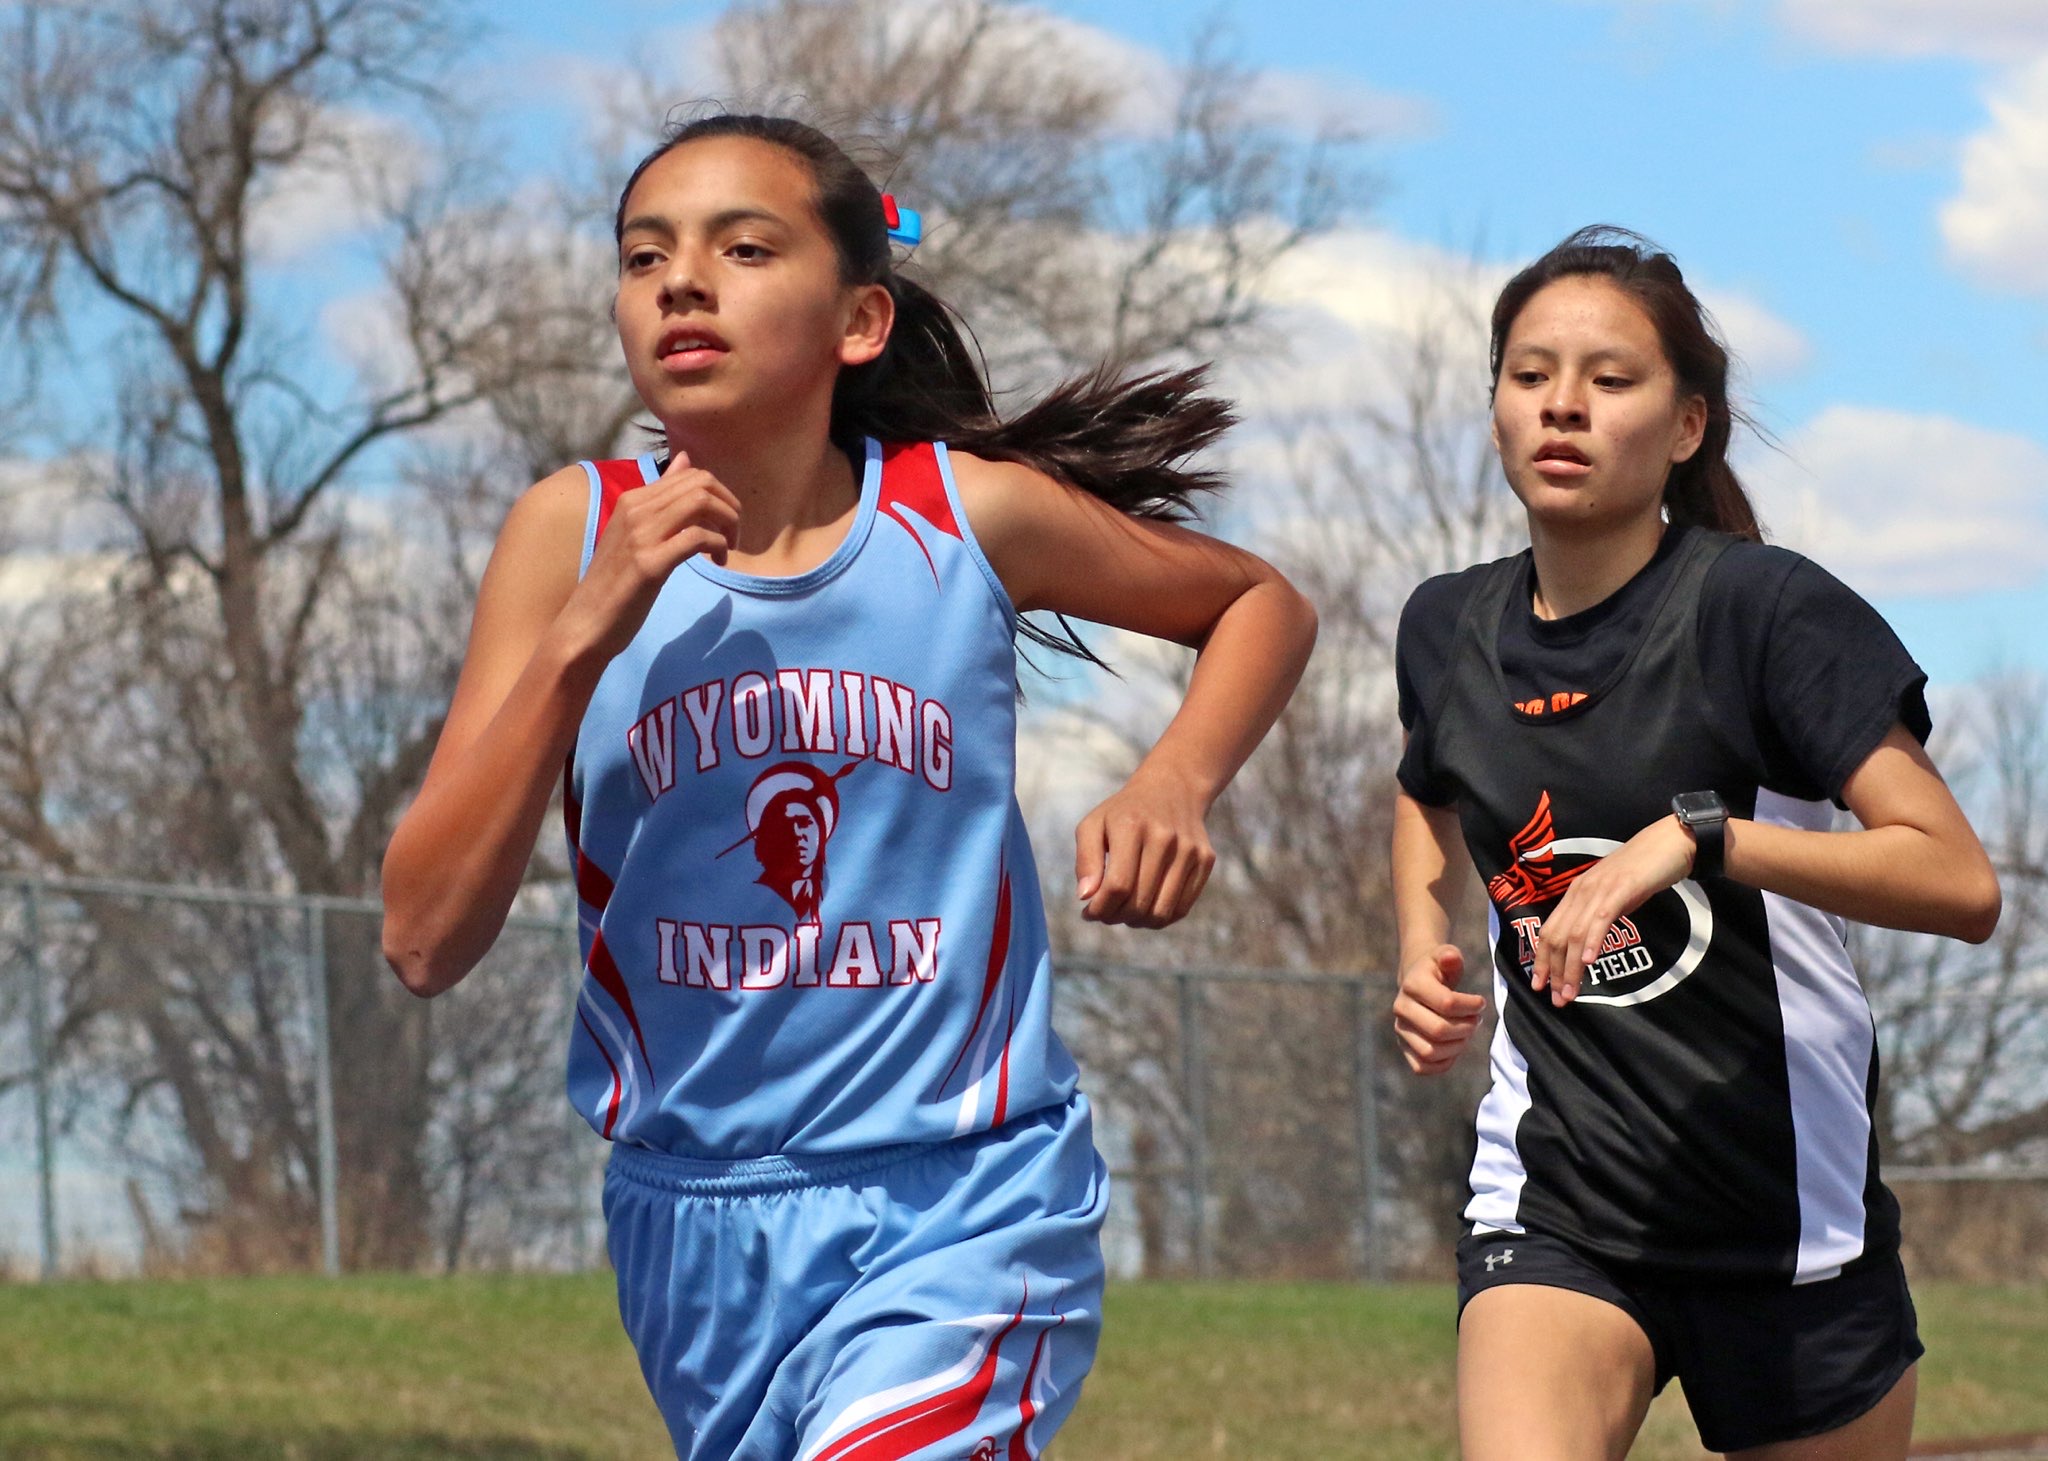 Larissa McElroy (Northern Arapaho): “Use Our Athletic Abilities As A Gift From The Creator”